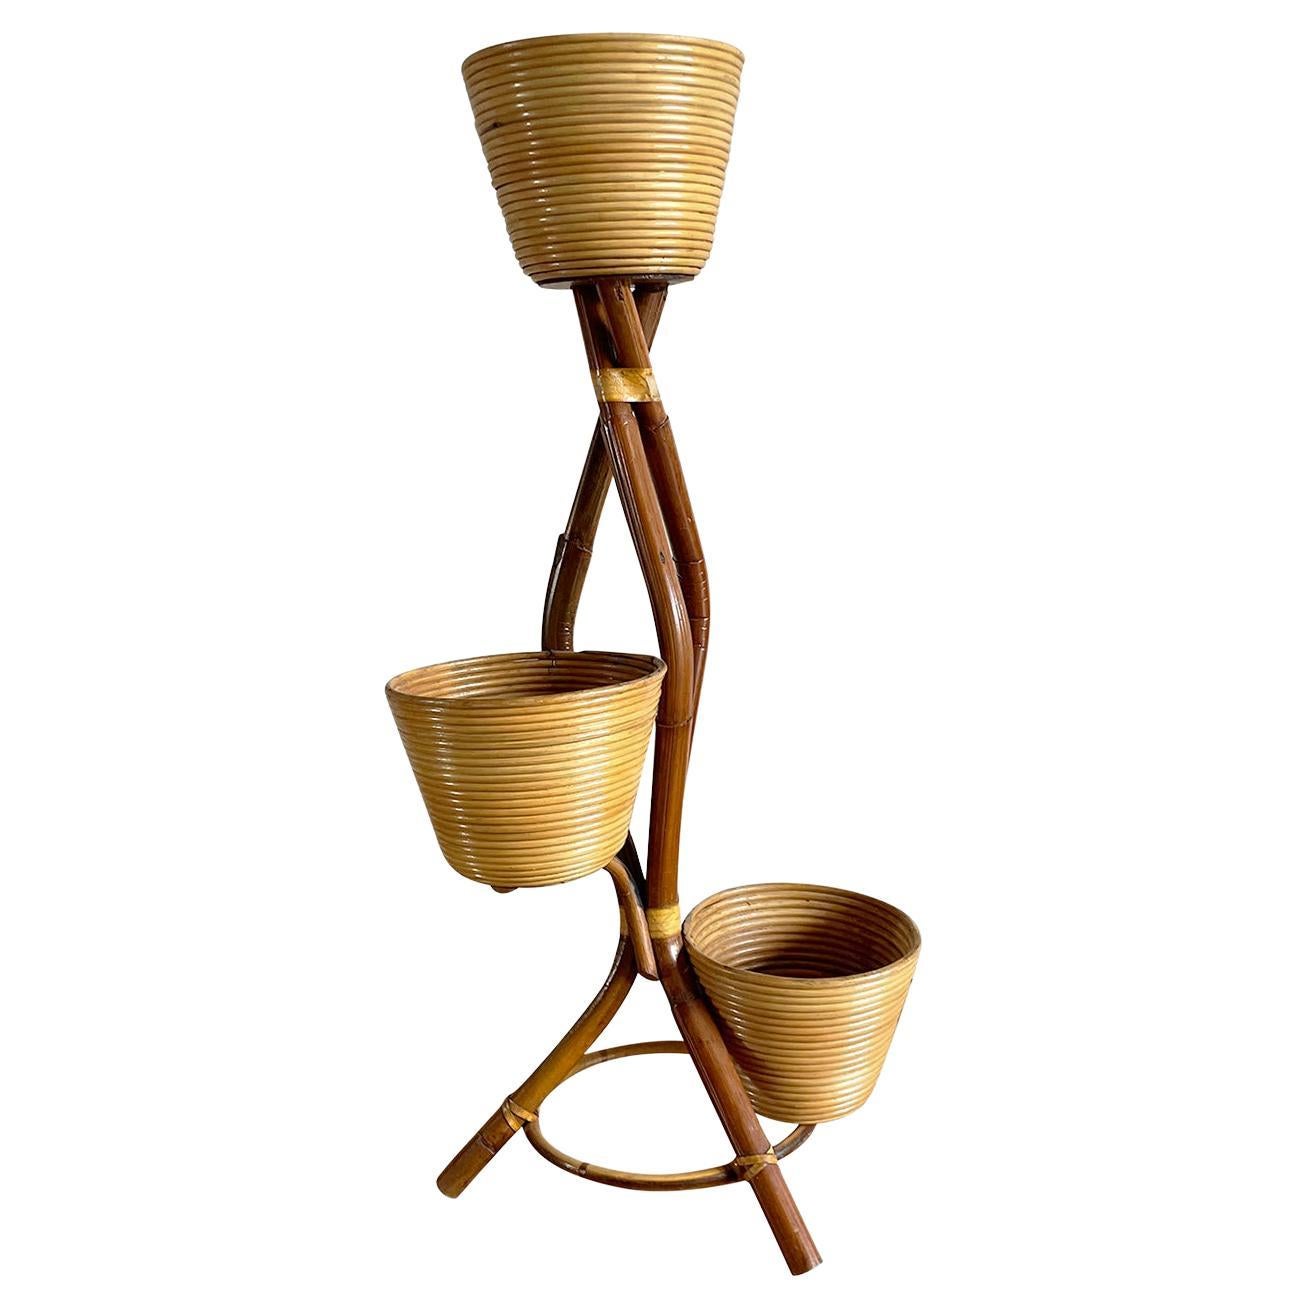 20th Century Italian Vintage Rattan Plant Stand in the style of Gio Ponti